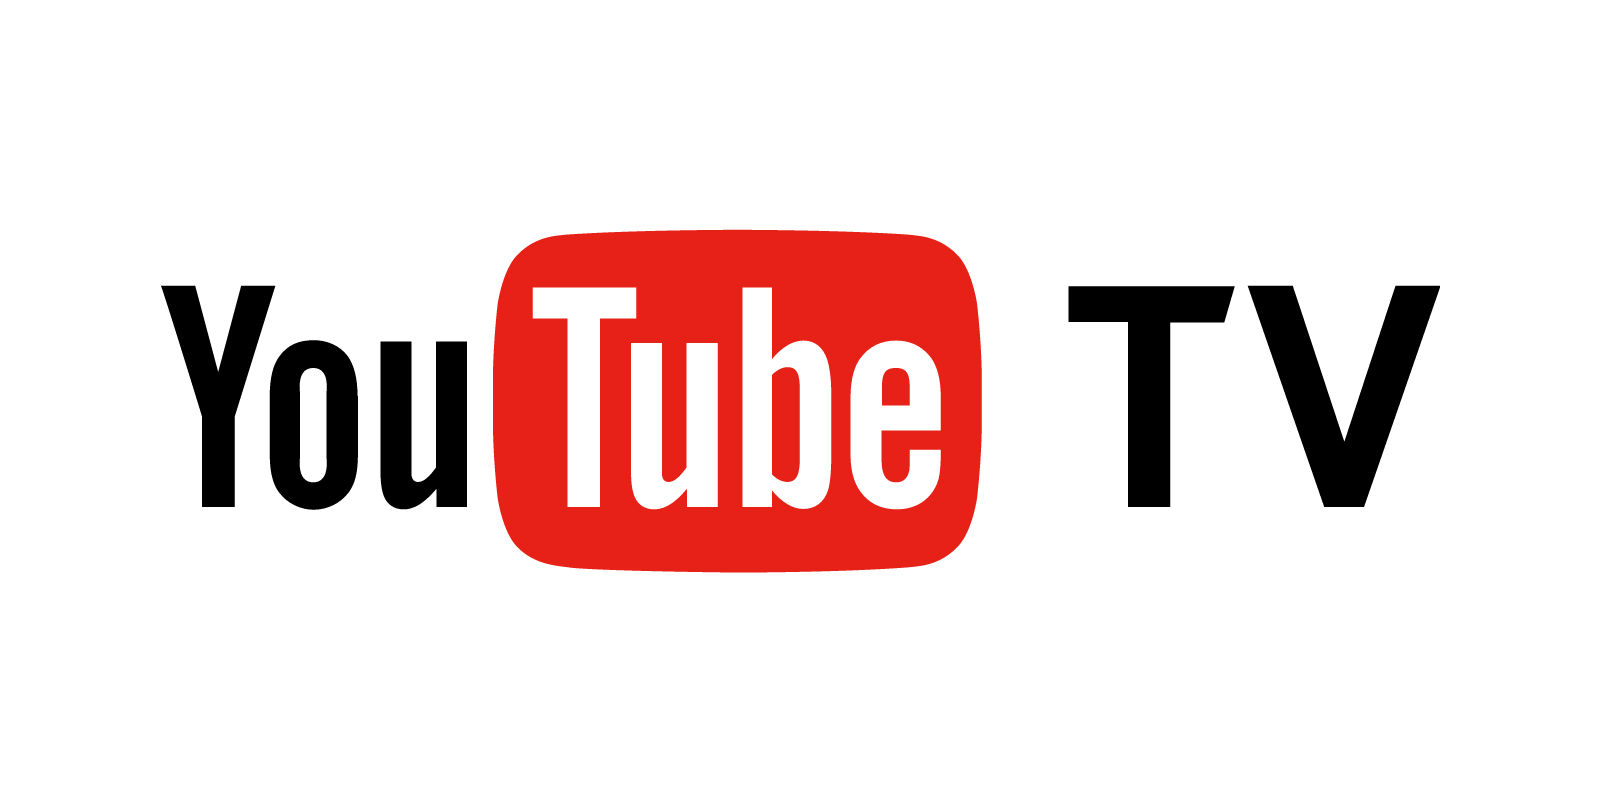 Google is now streaming TV in the US through YouTube for $35 per month